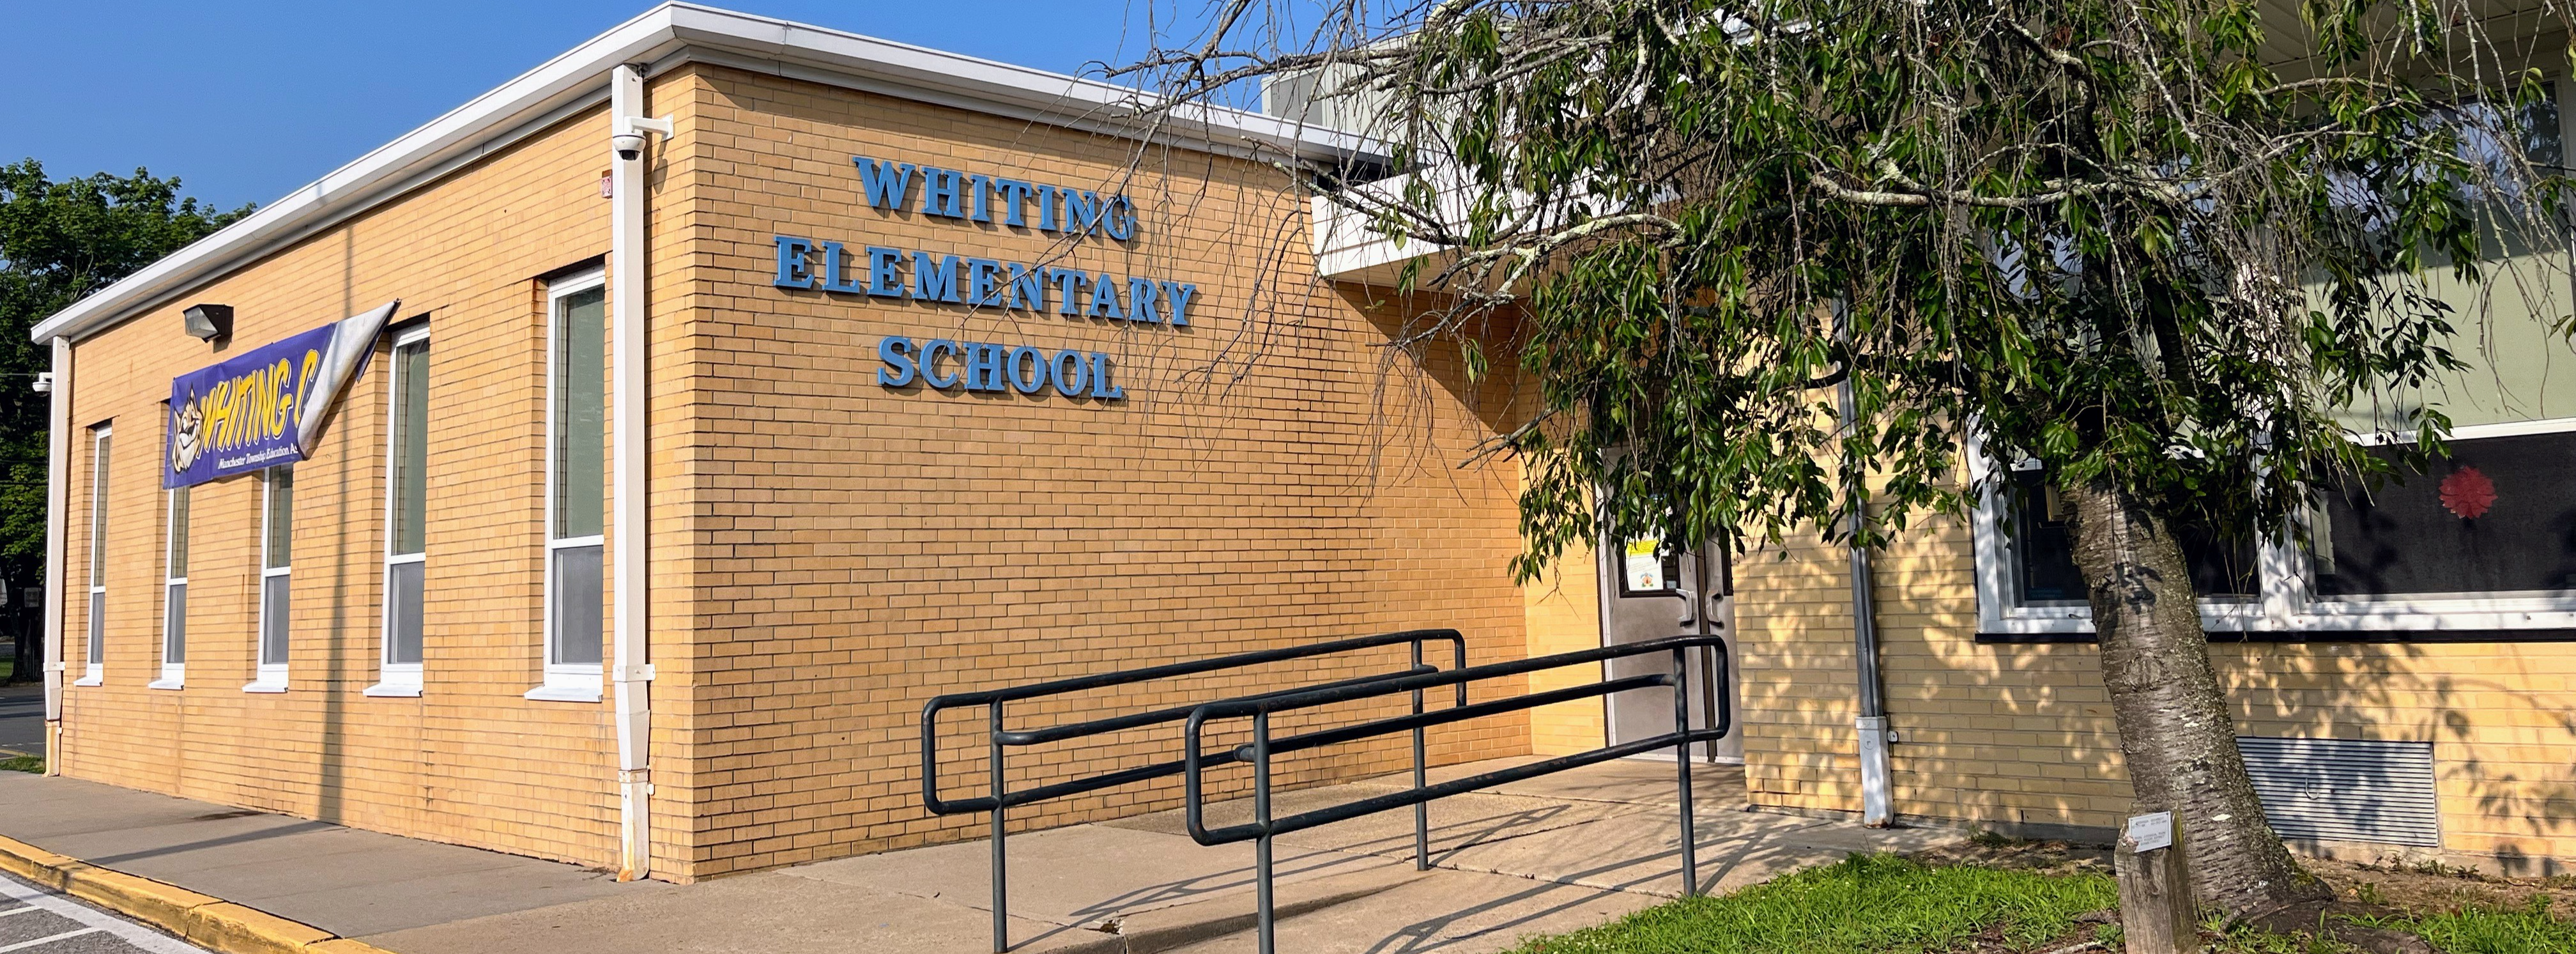 Whiting Elementary School Exterior